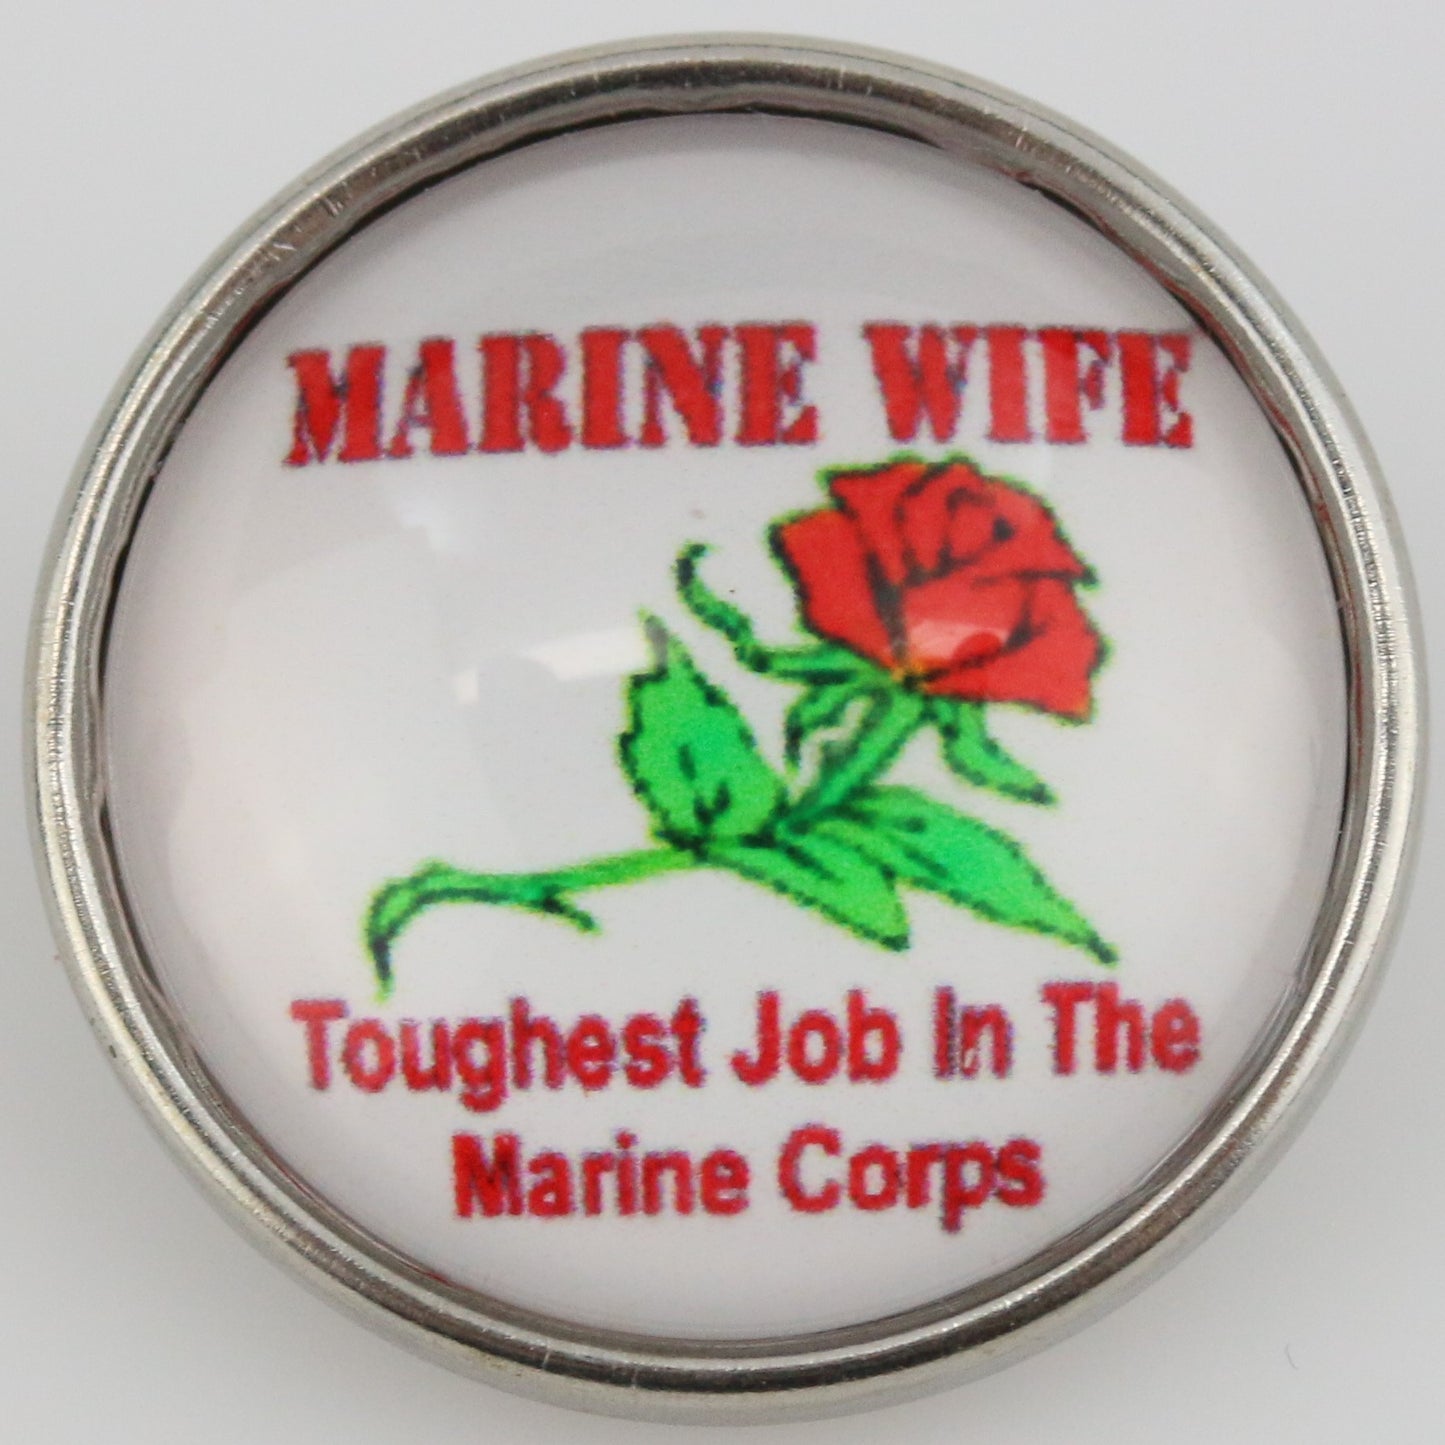 54069 - Snap - 20mm - MARINE WIFE - Toughest Job In The Marine Corps